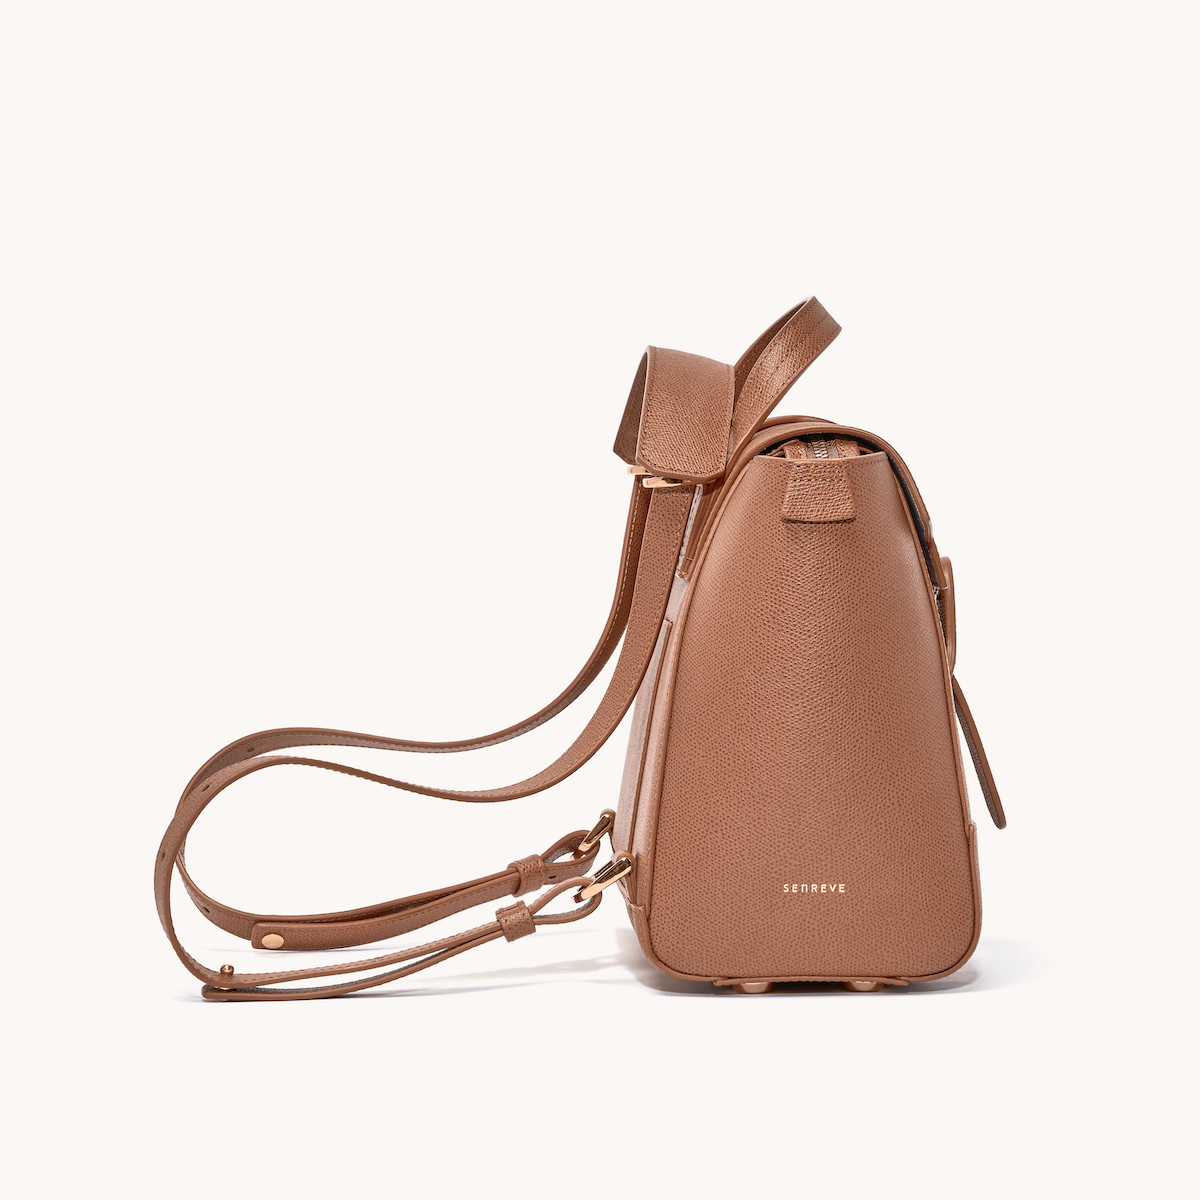 Midi Maestra Bag Pebbled Chestnut with Gold Hardware Side View